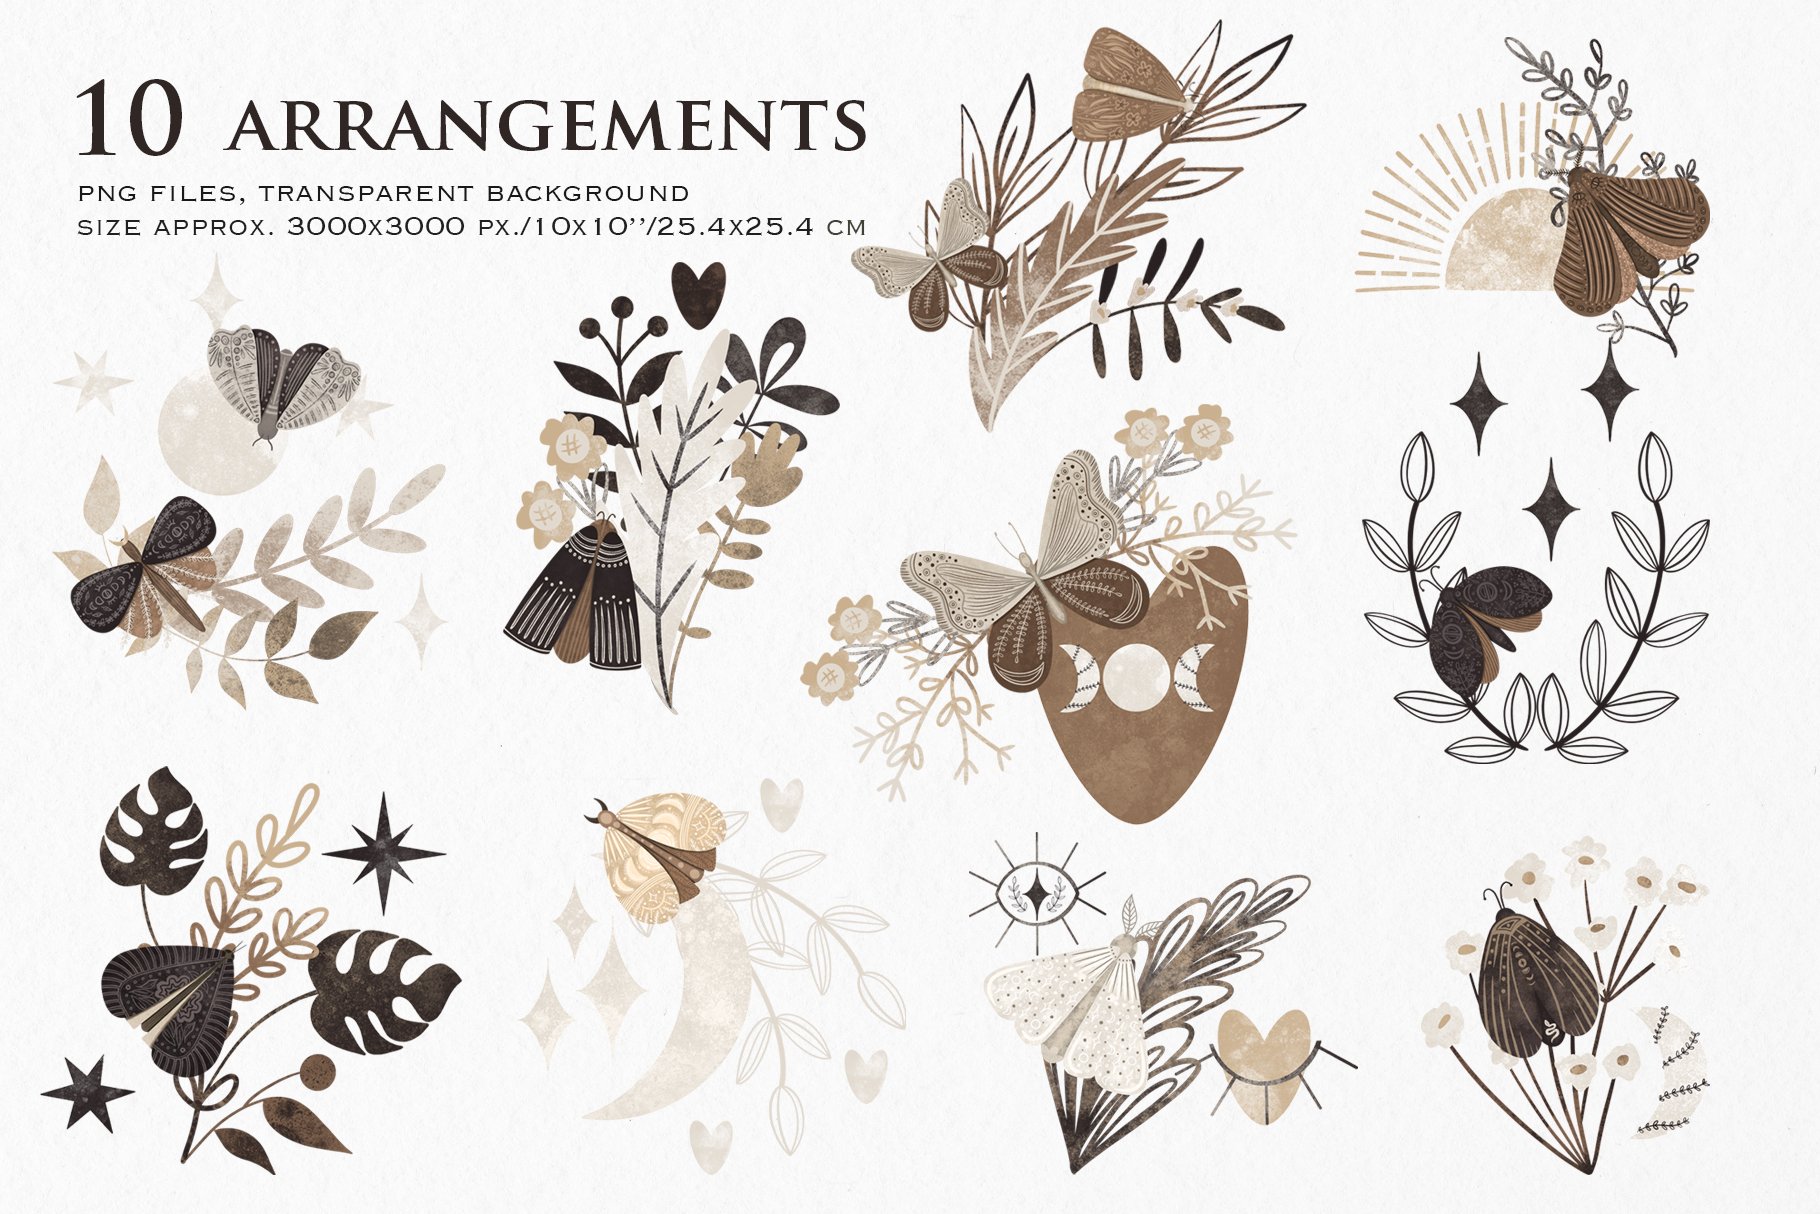 Some floral elements for illustration with moths.